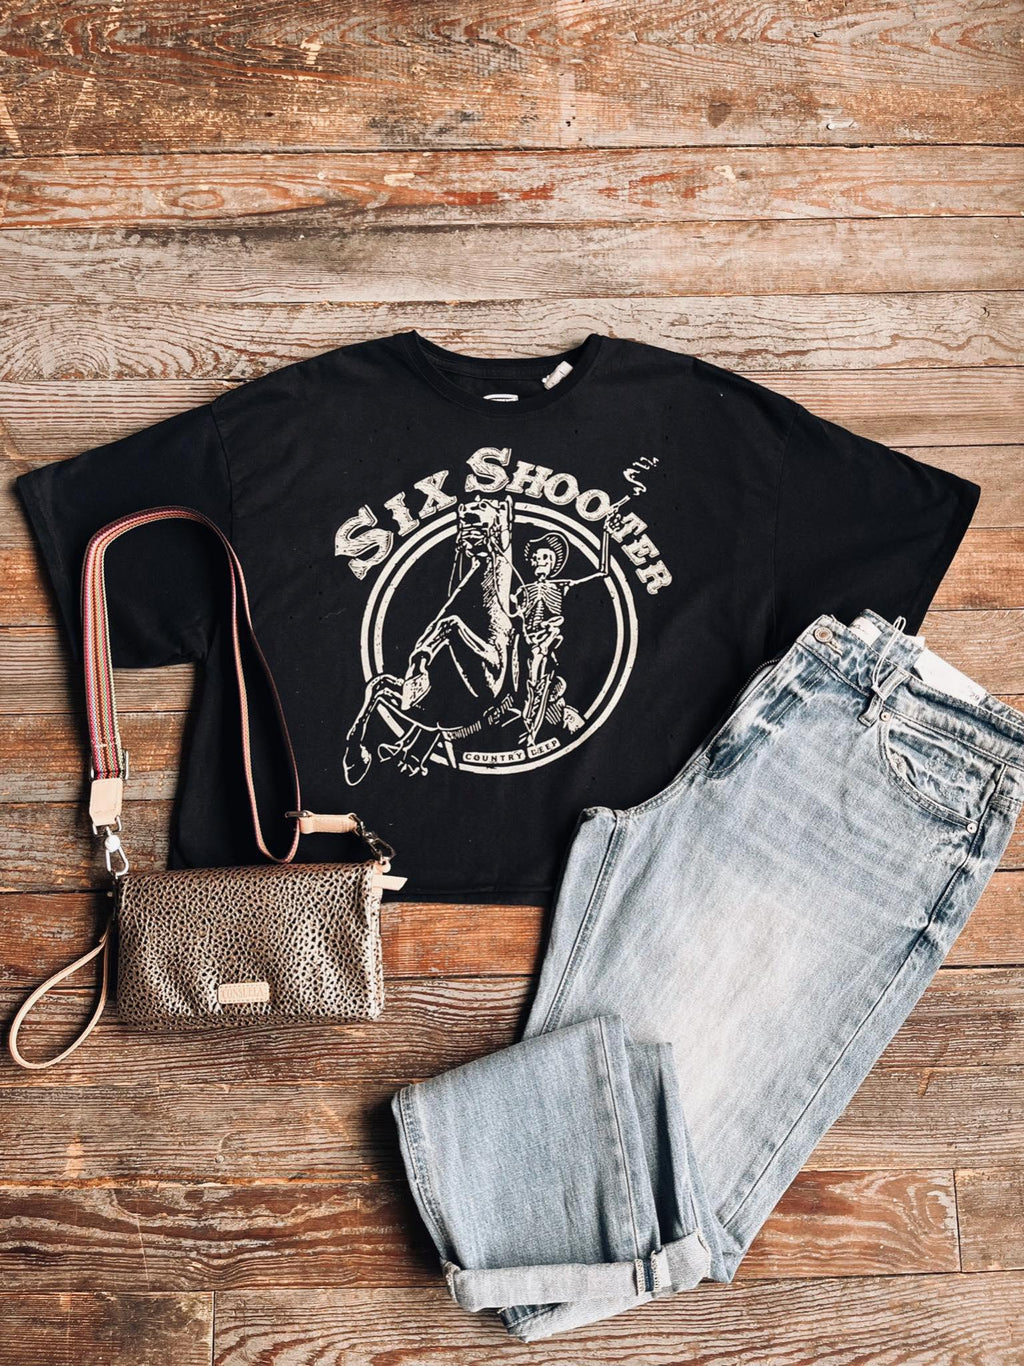 Six Shooter Vintage Cropped Tee